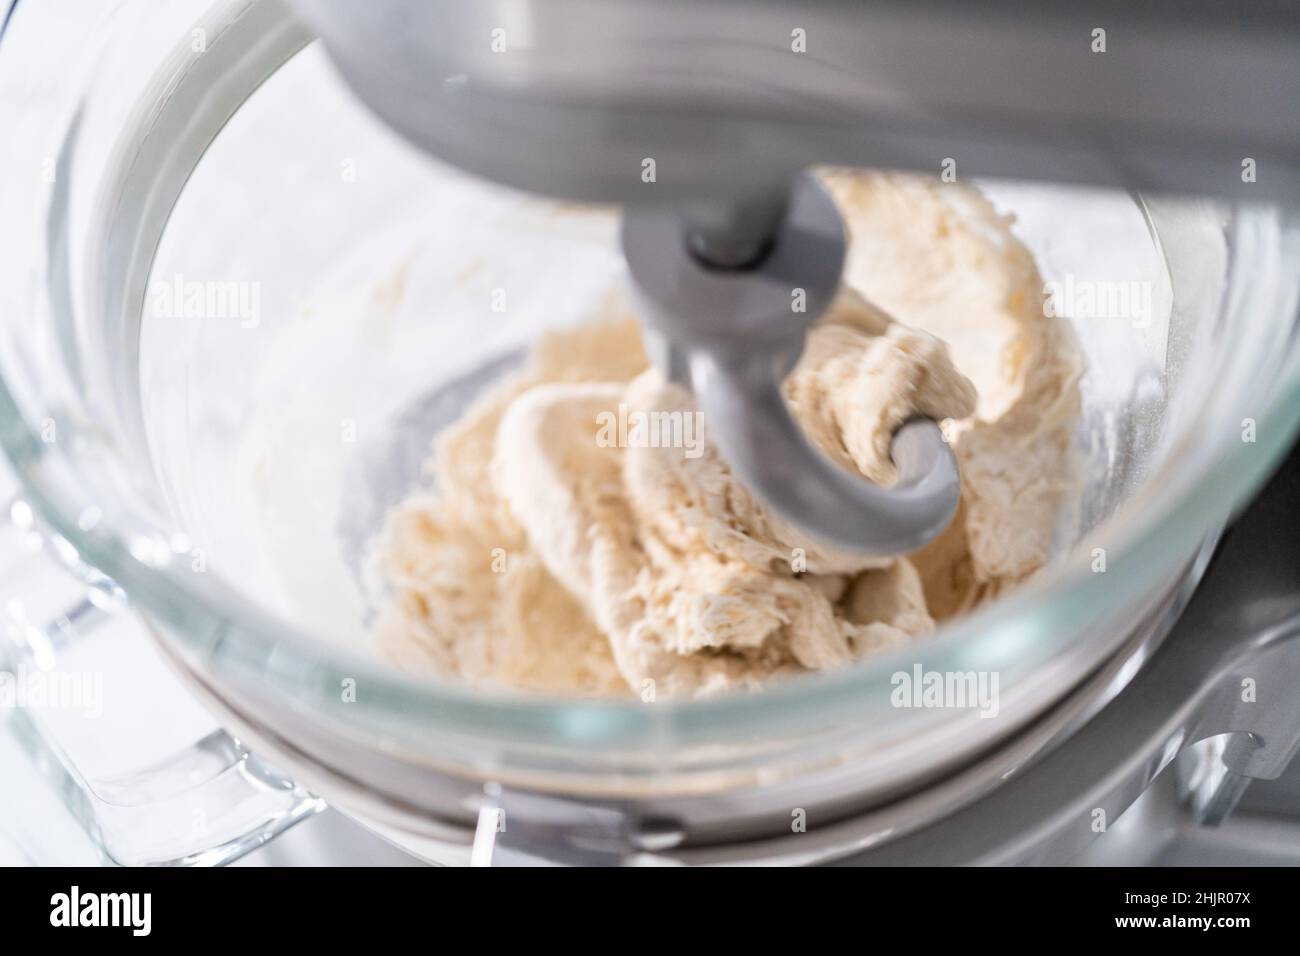 https://c8.alamy.com/comp/2HJR07X/mixing-ingredients-in-a-large-glass-mixing-bowl-to-pizza-dough-2HJR07X.jpg